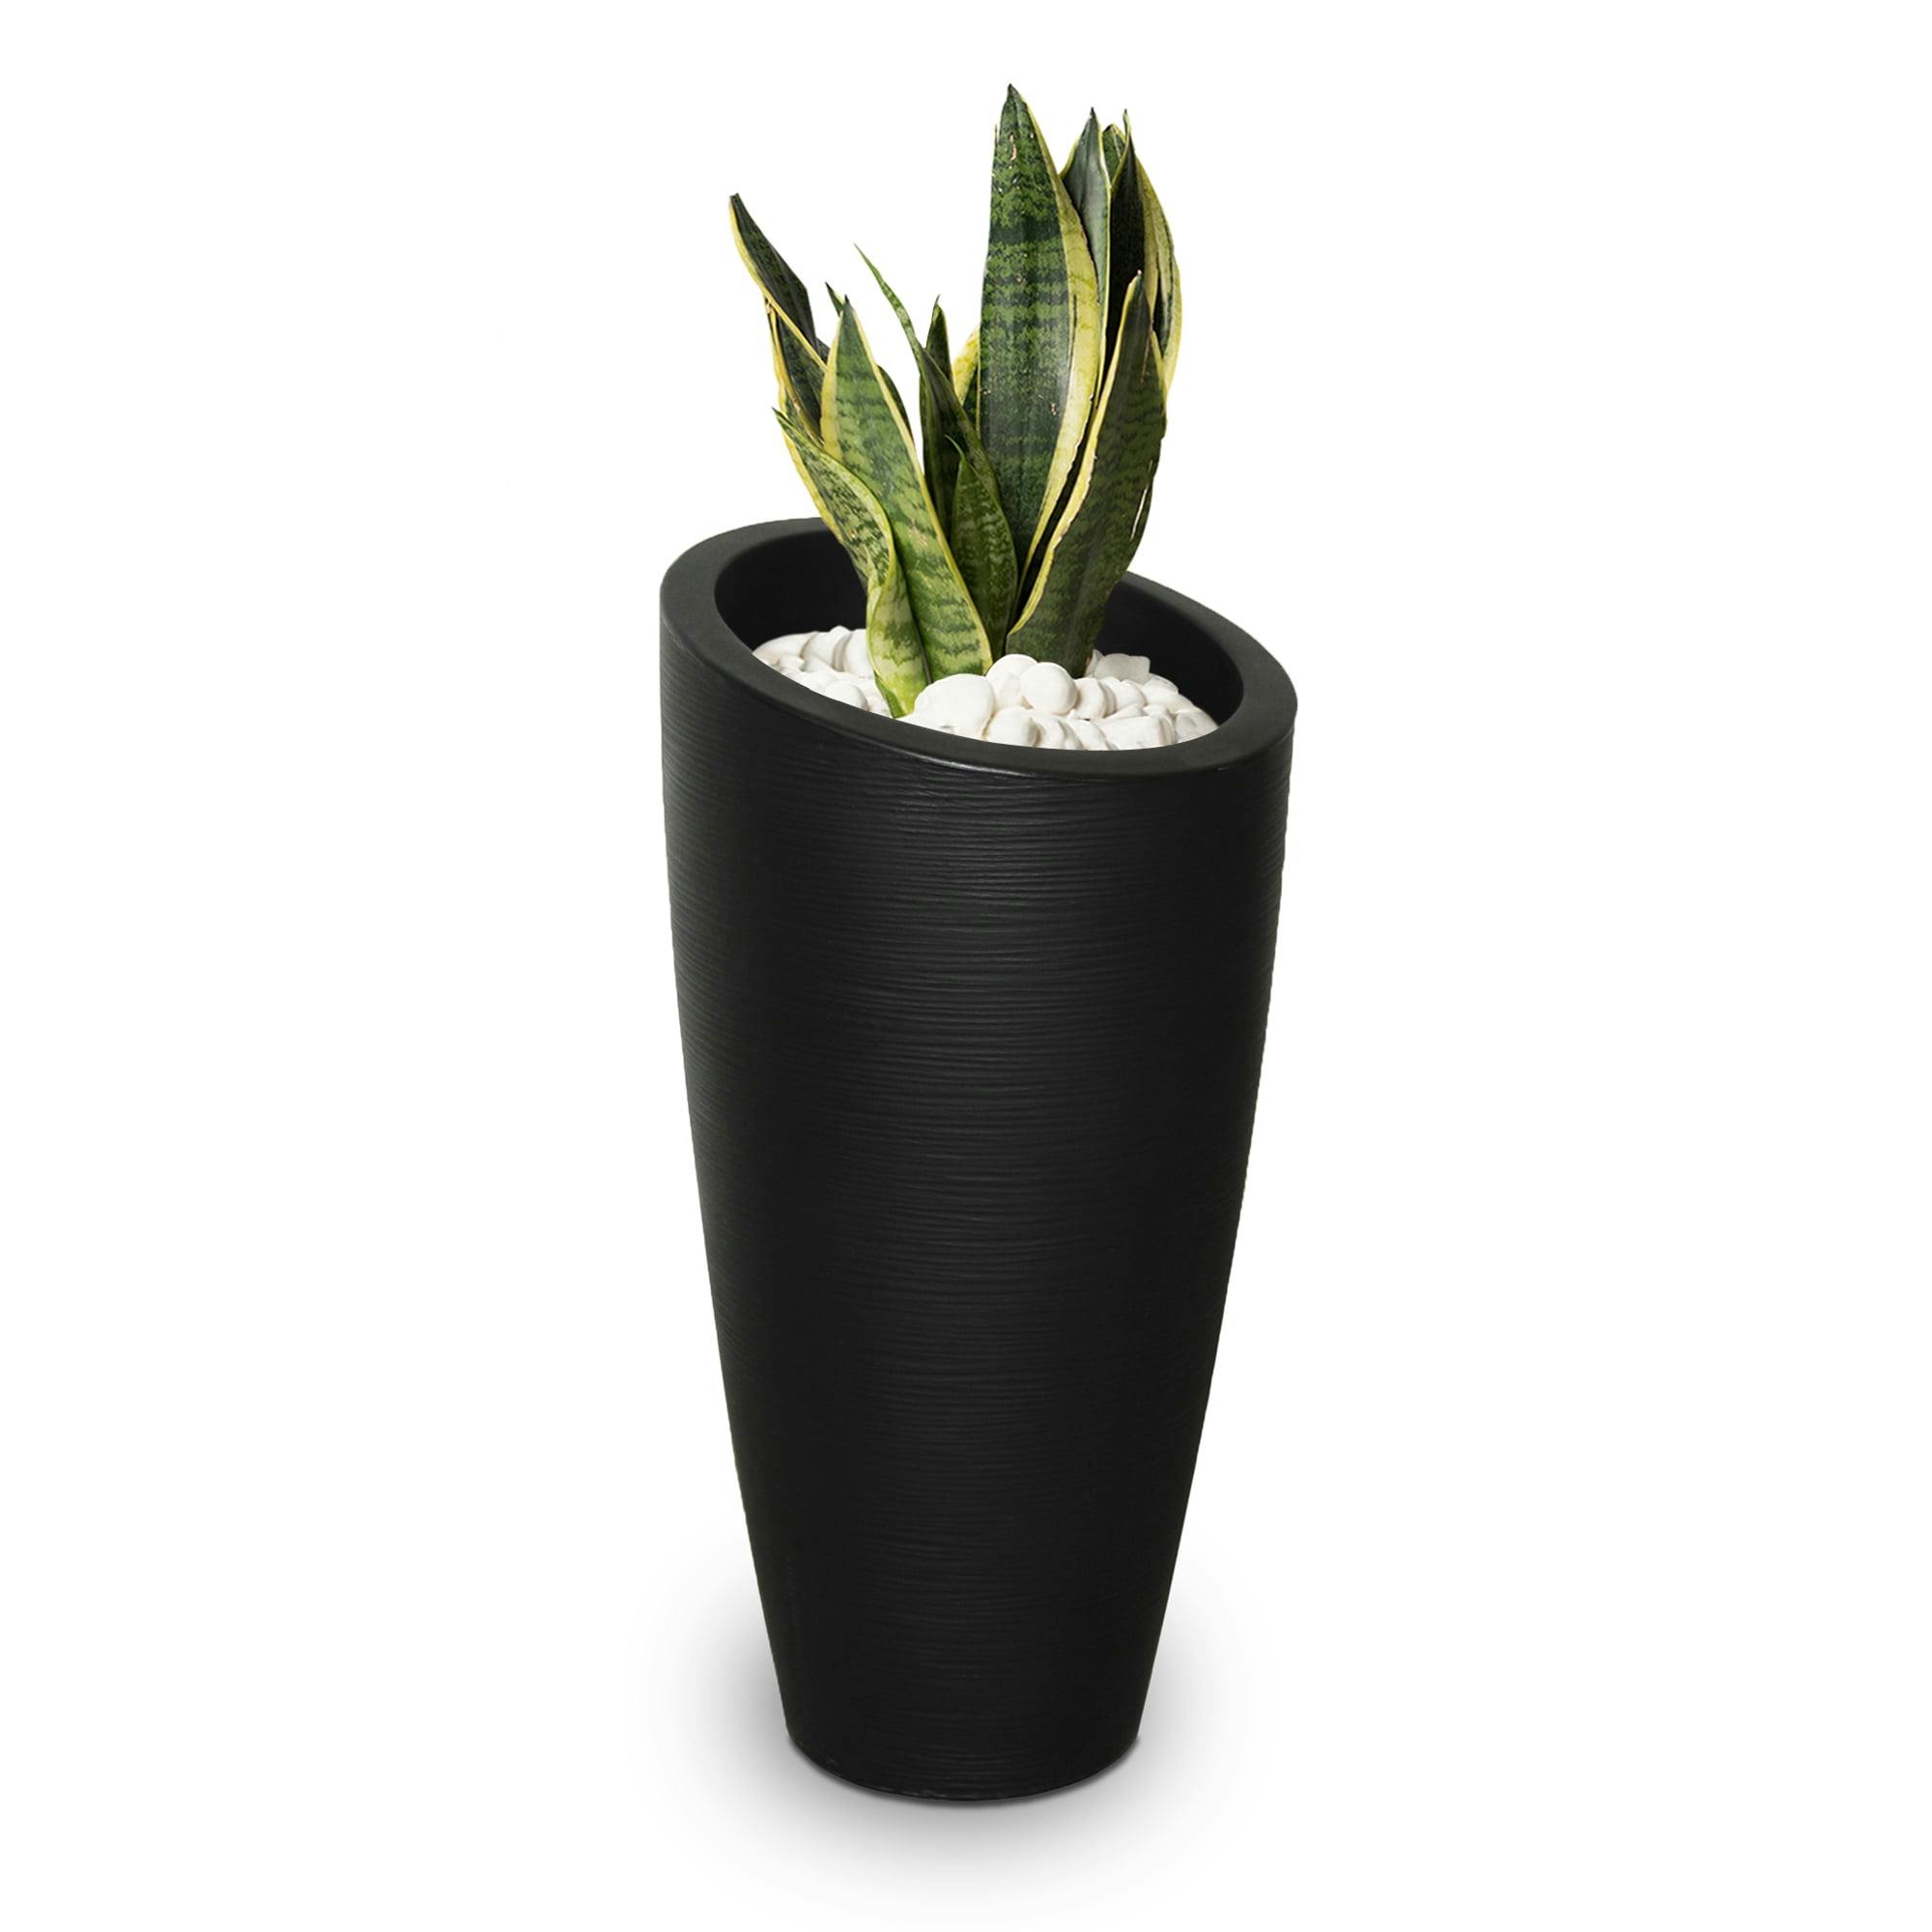 Modesto 32" Tall Black Polyethylene Planter with Grooved Texture